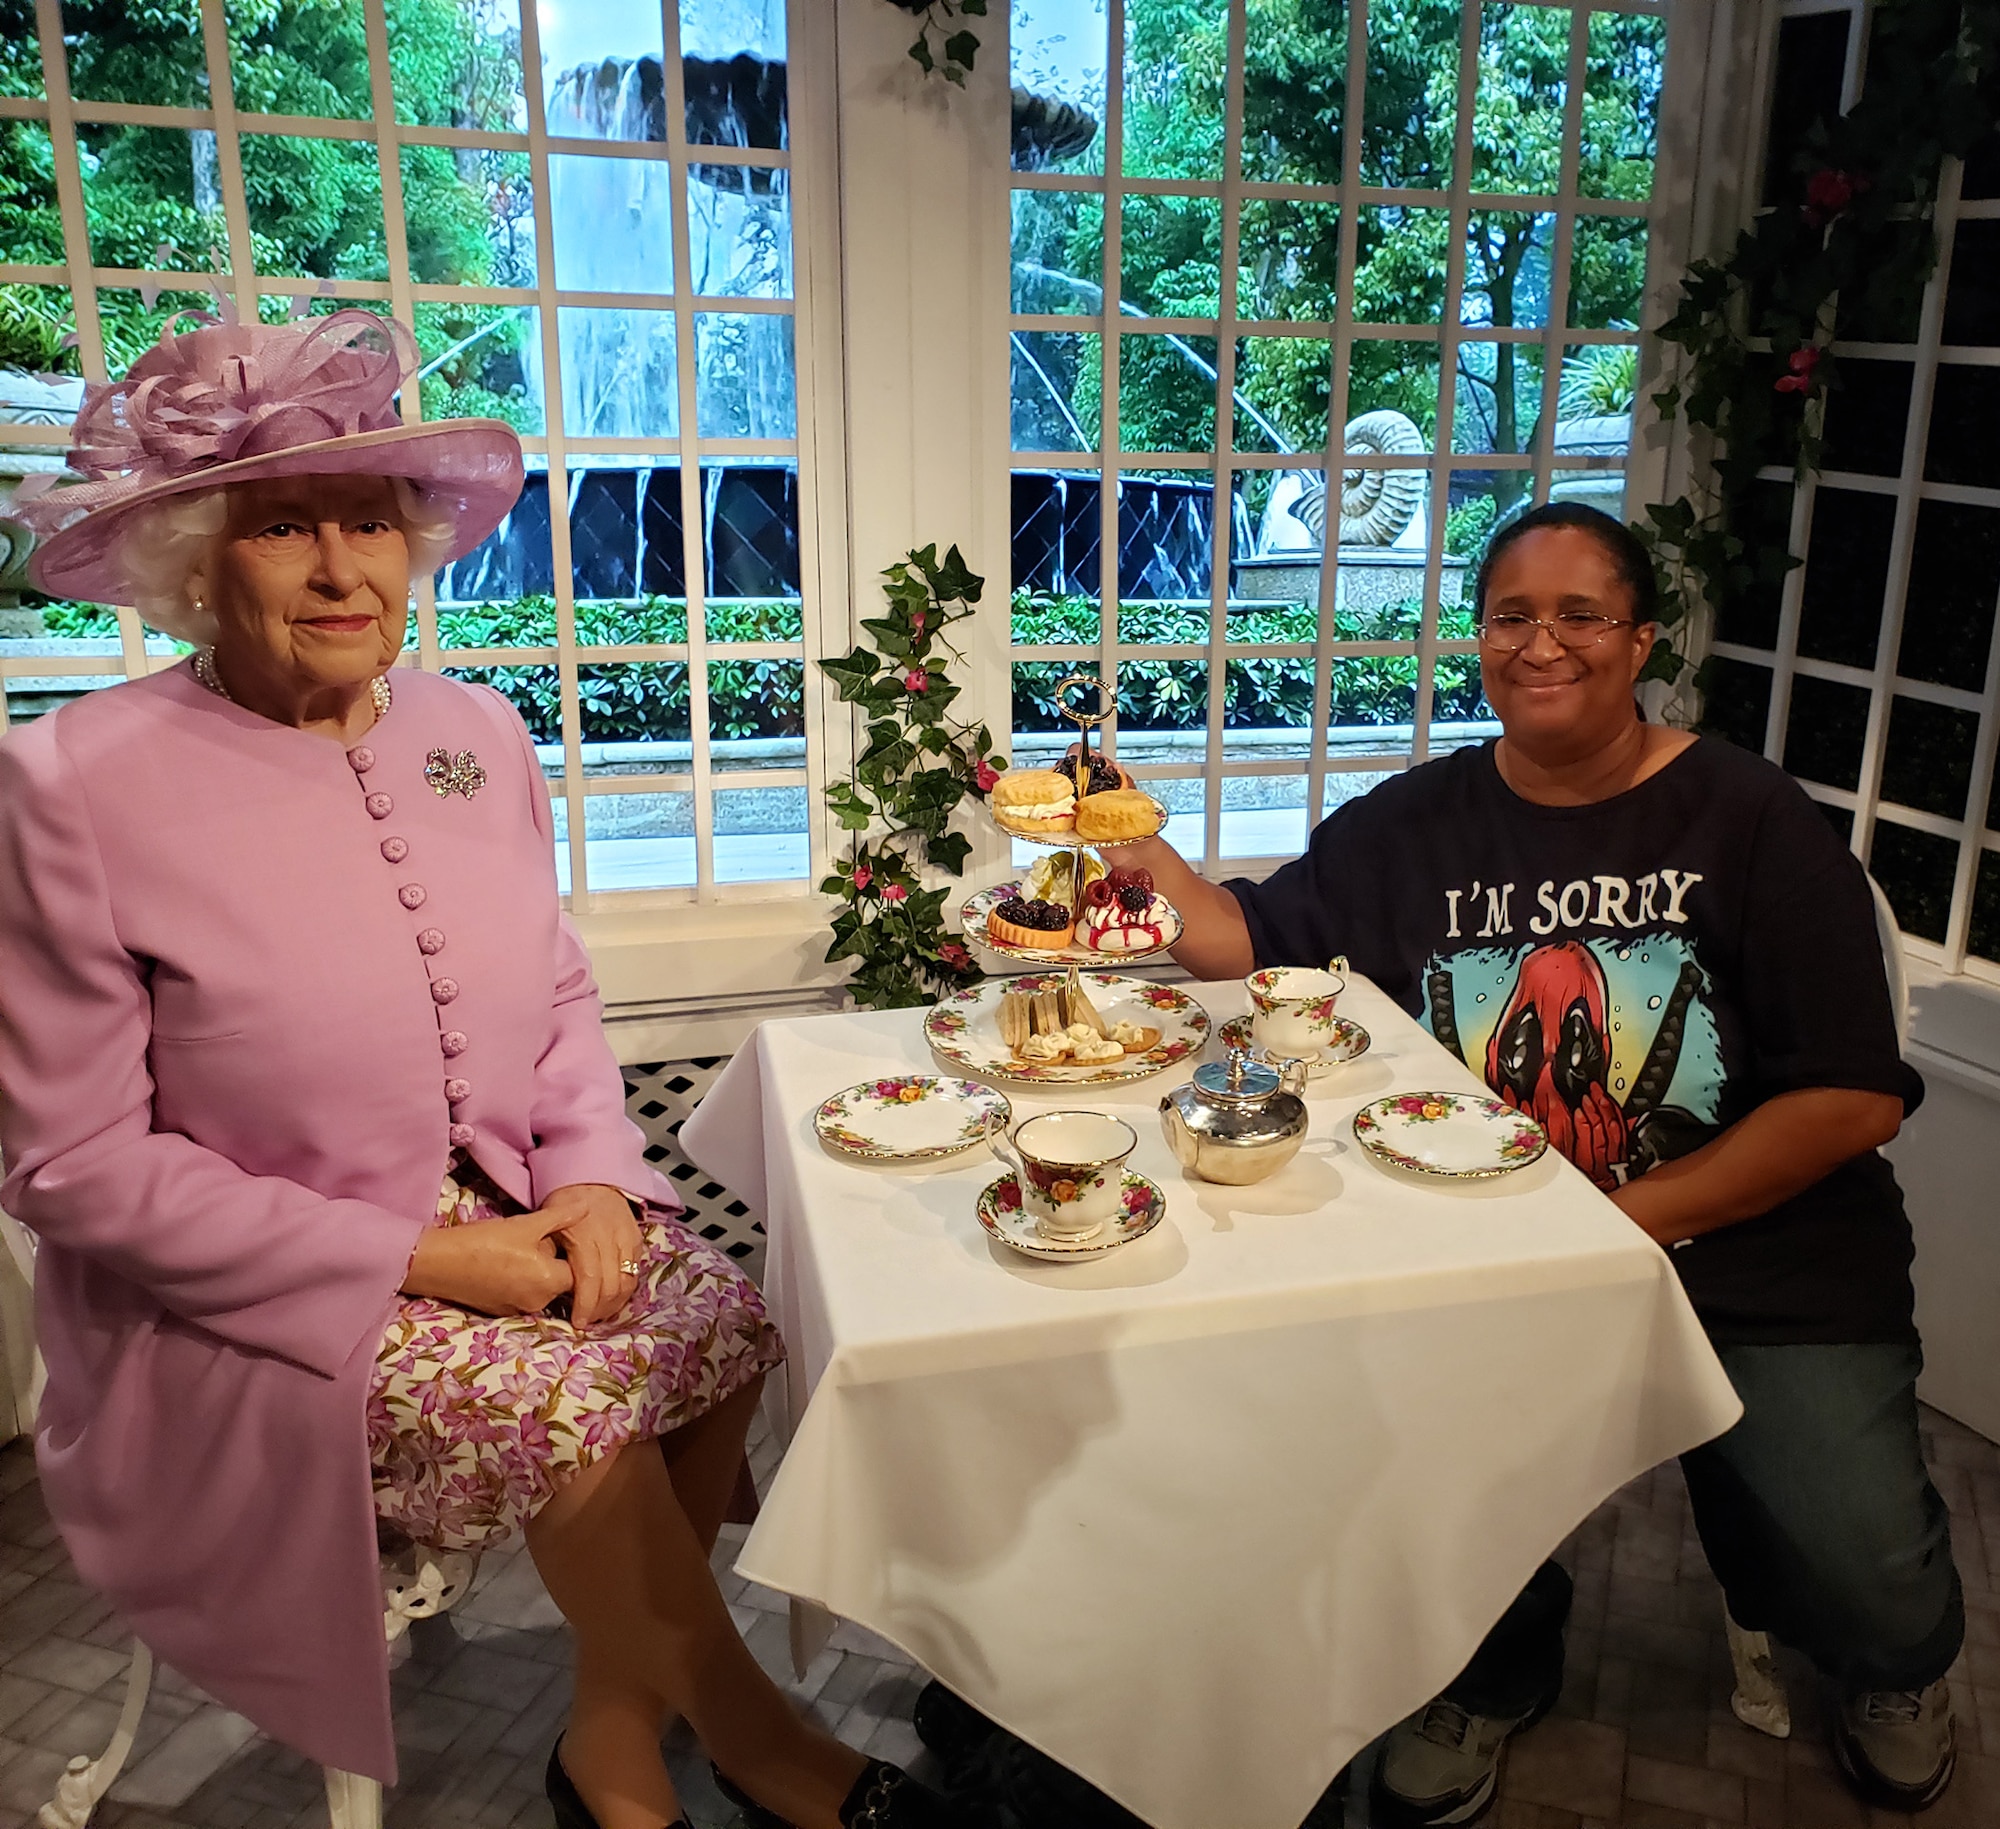 Candy Knight poses with a wax replica of Queen Elizabeth II at Madame Tussauds London. Knight is the Public Affairs Specialist for Headquarters Fourth Air Force at March Air Reserve Base, California. (Courtesy photo by Candy Knight)